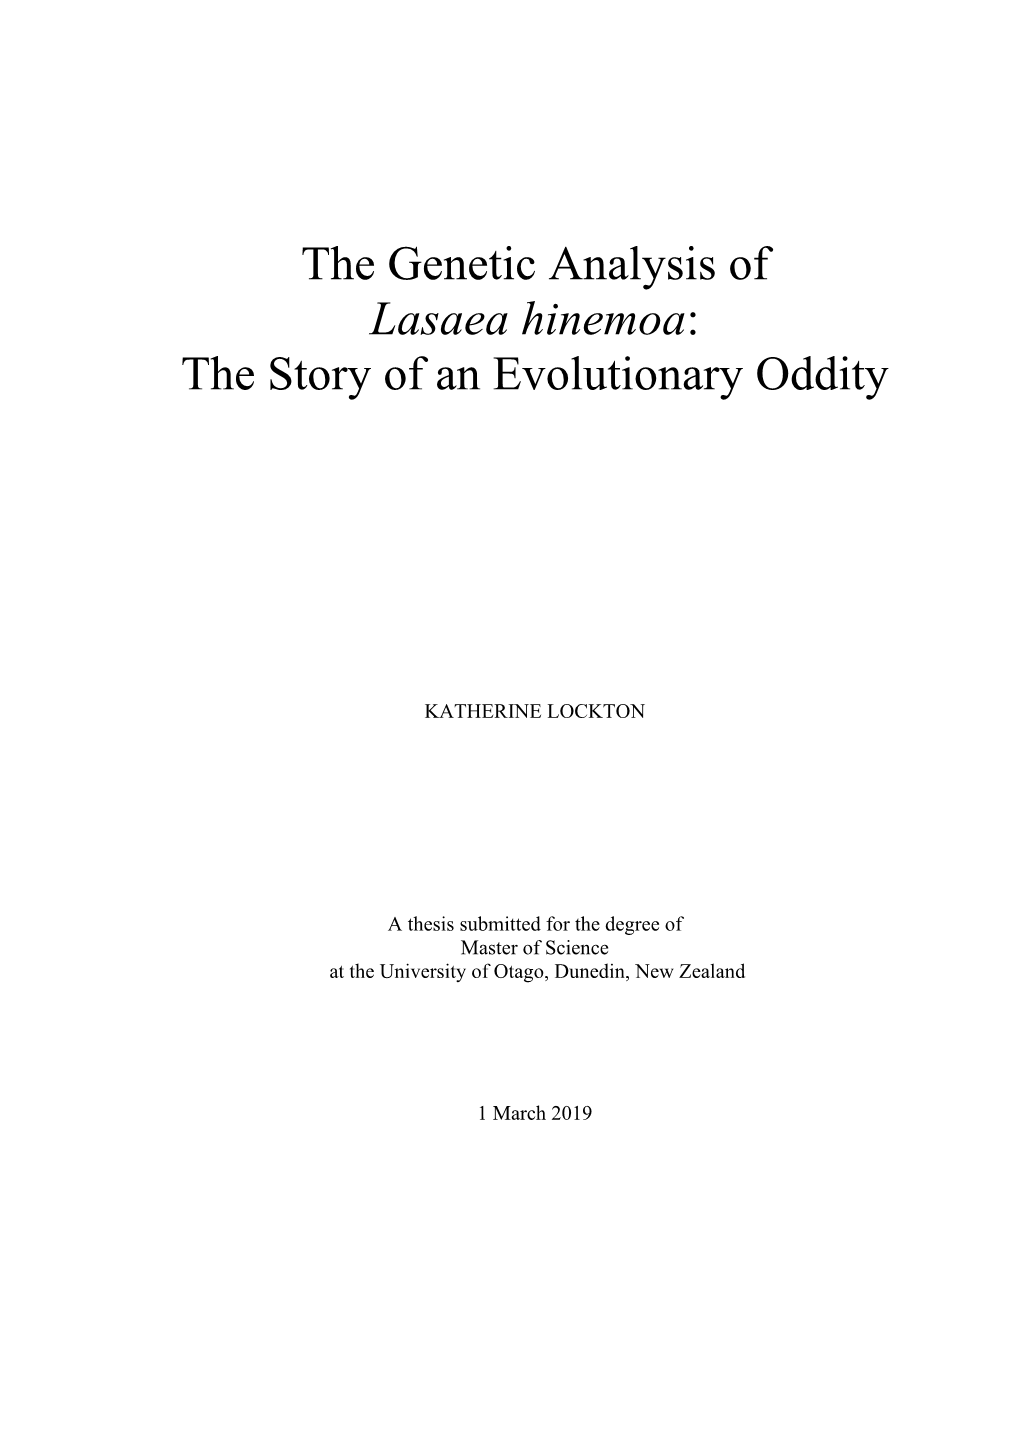 The Genetic Analysis of Lasaea Hinemoa: the Story of an Evolutionary Oddity